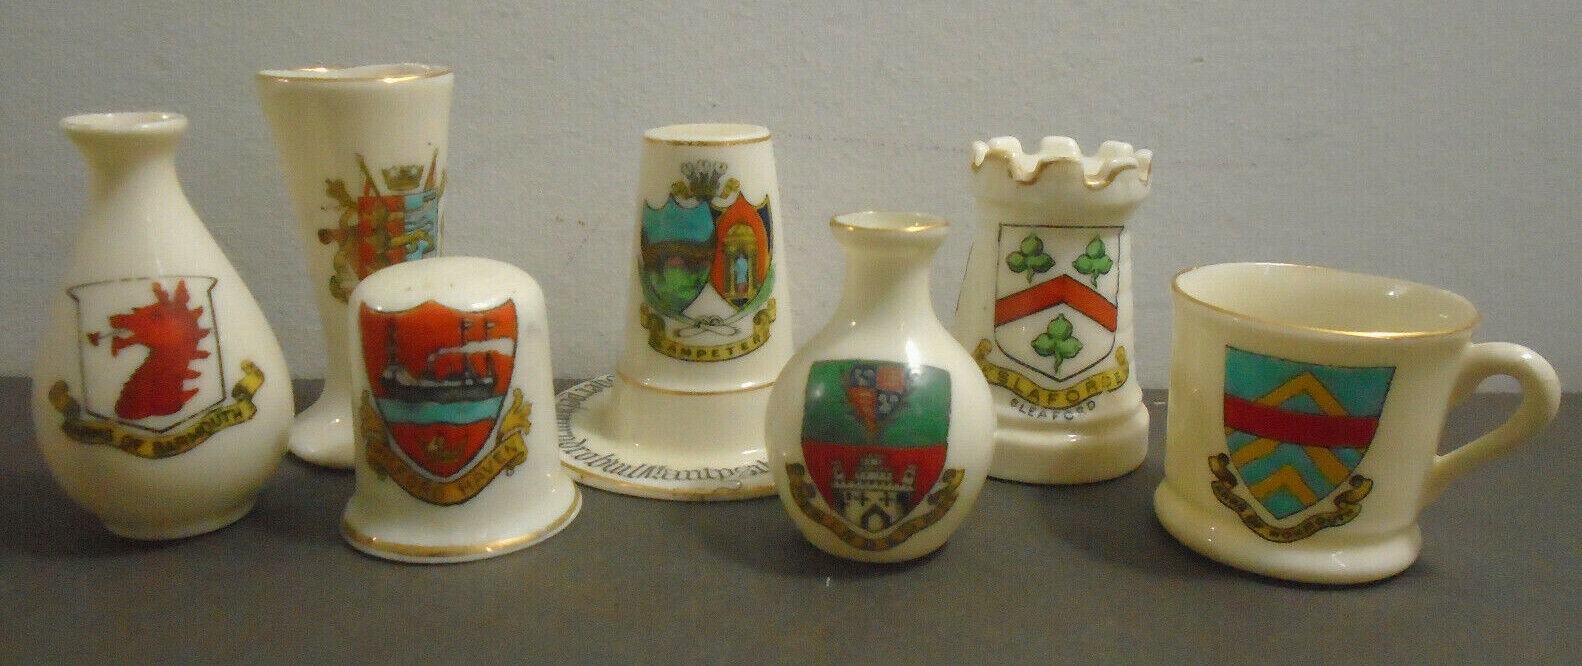 VTG A & S STOKE ON TRENT + W & R STOKE ON TRENT MINIATURE CHINA CREST WARE LOT